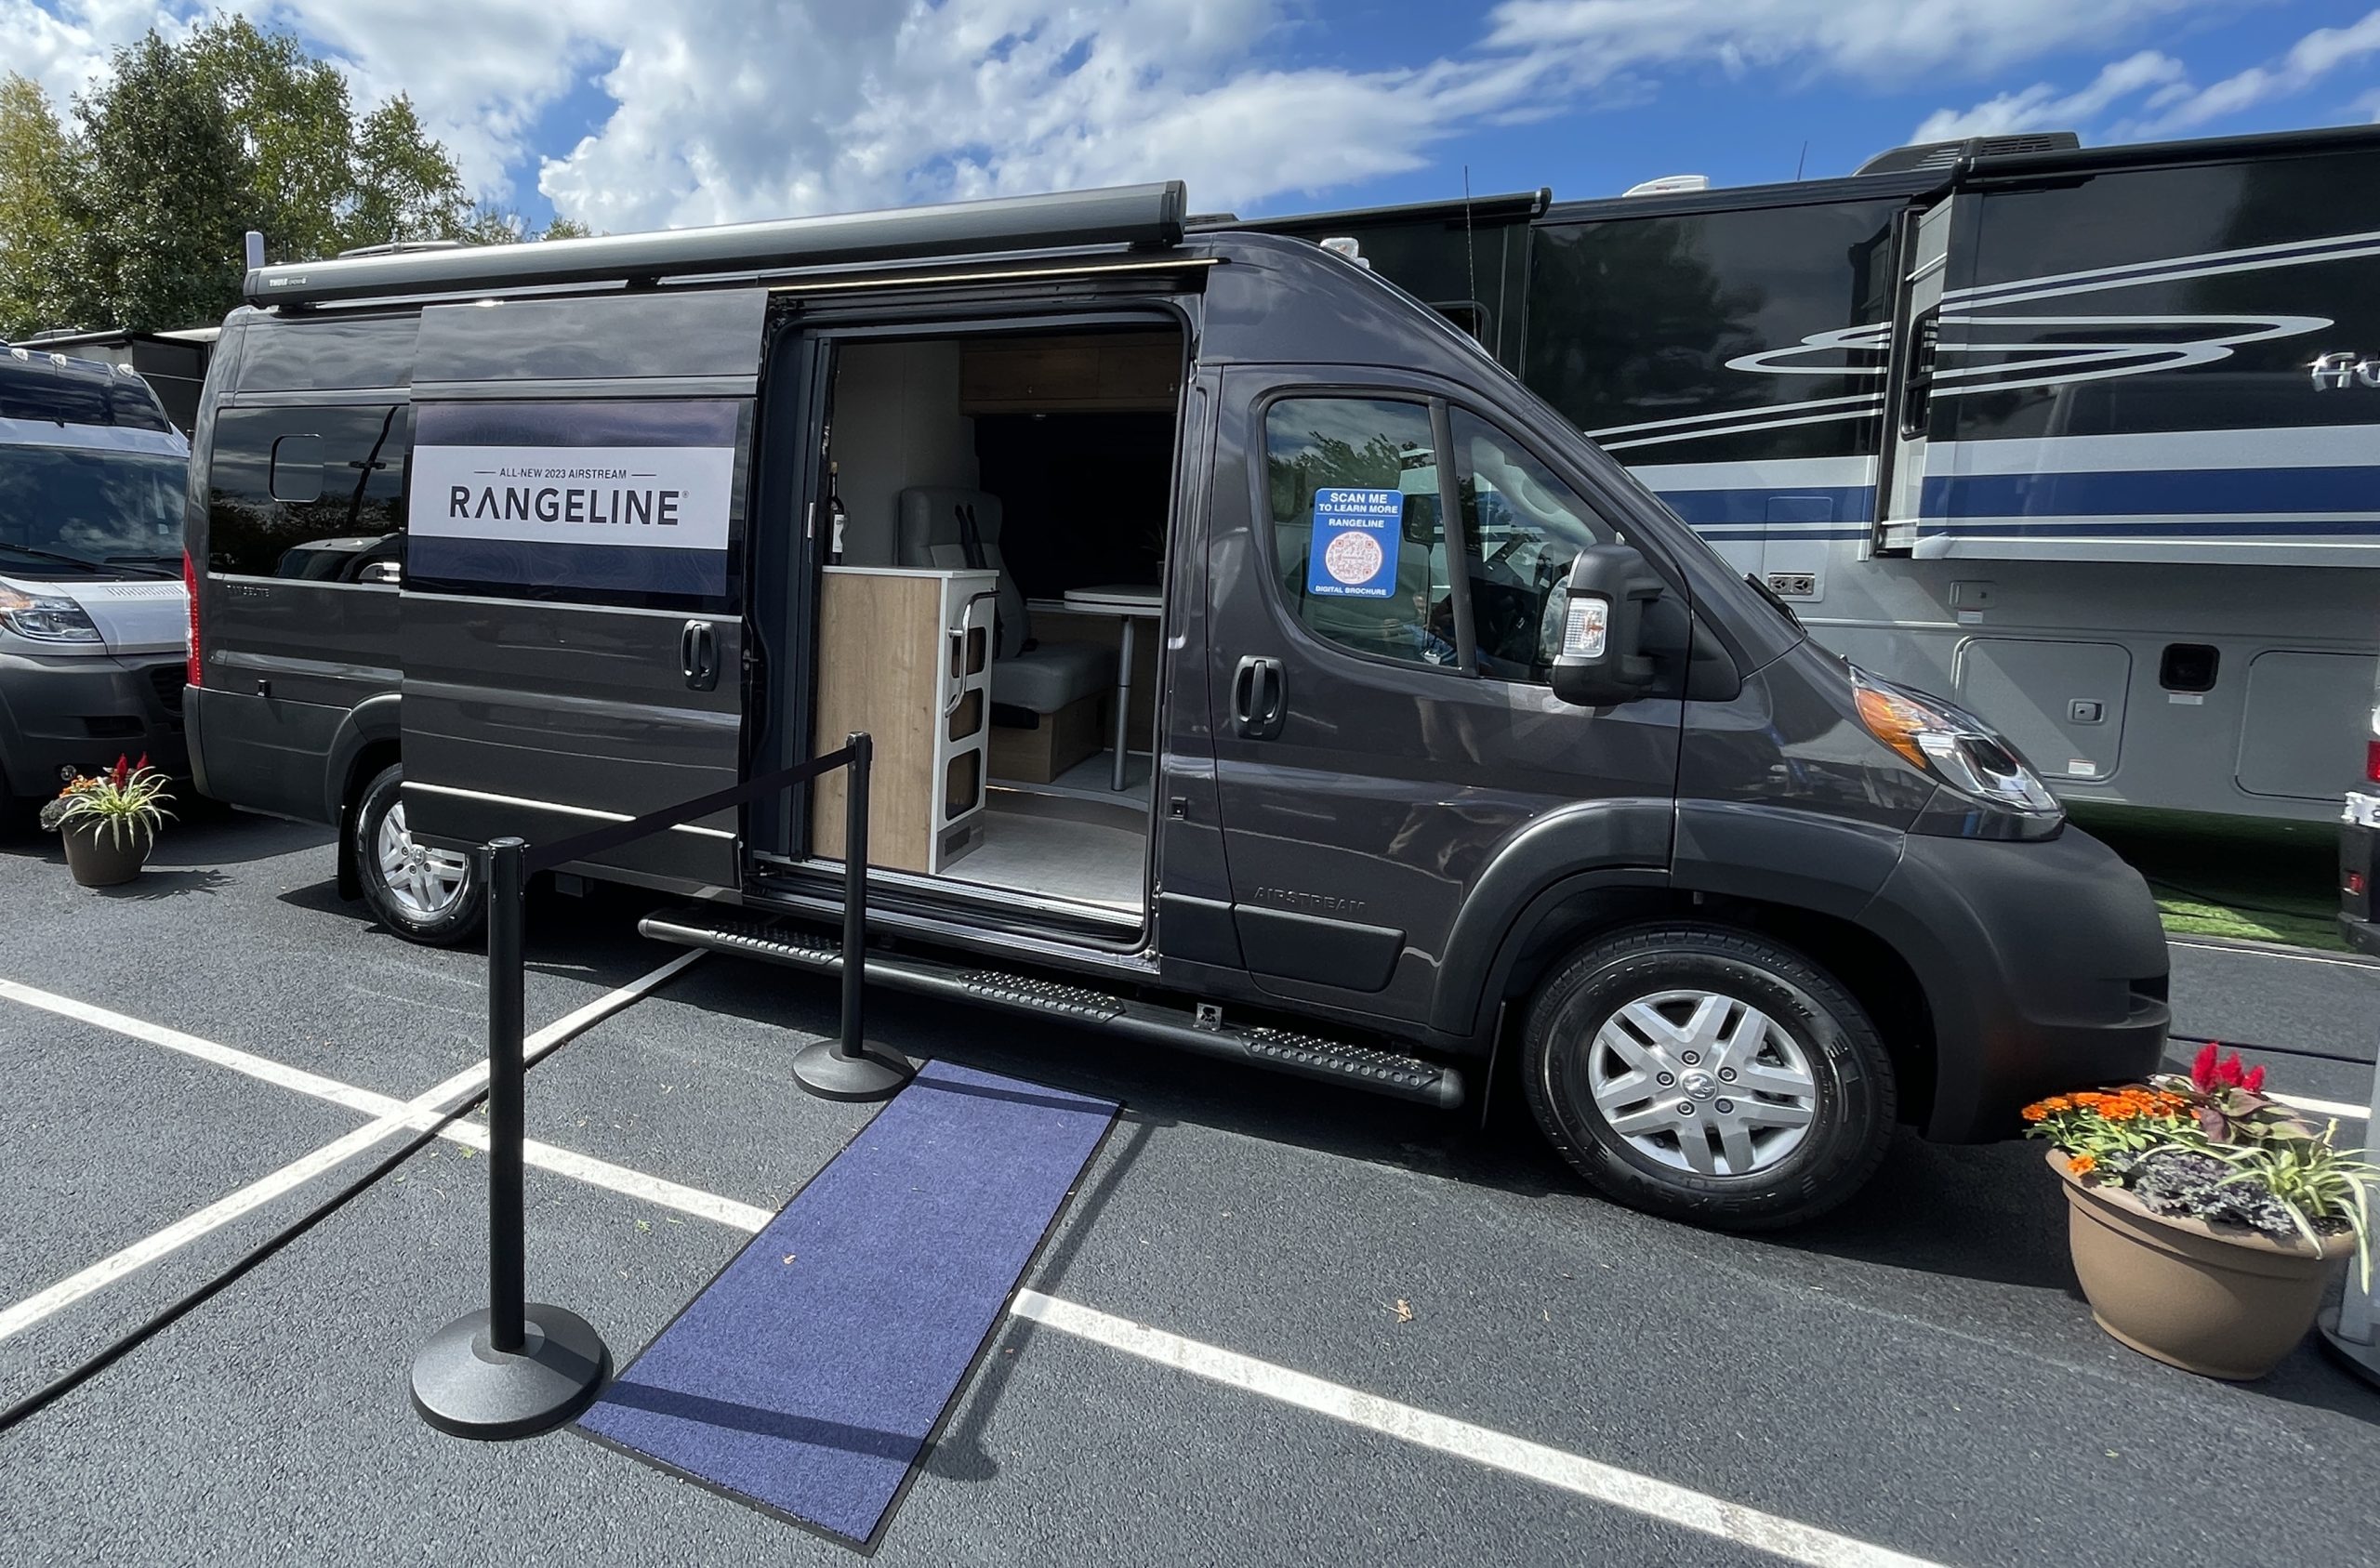 Airstream Launches ProMaster-Based Rangeline Class B